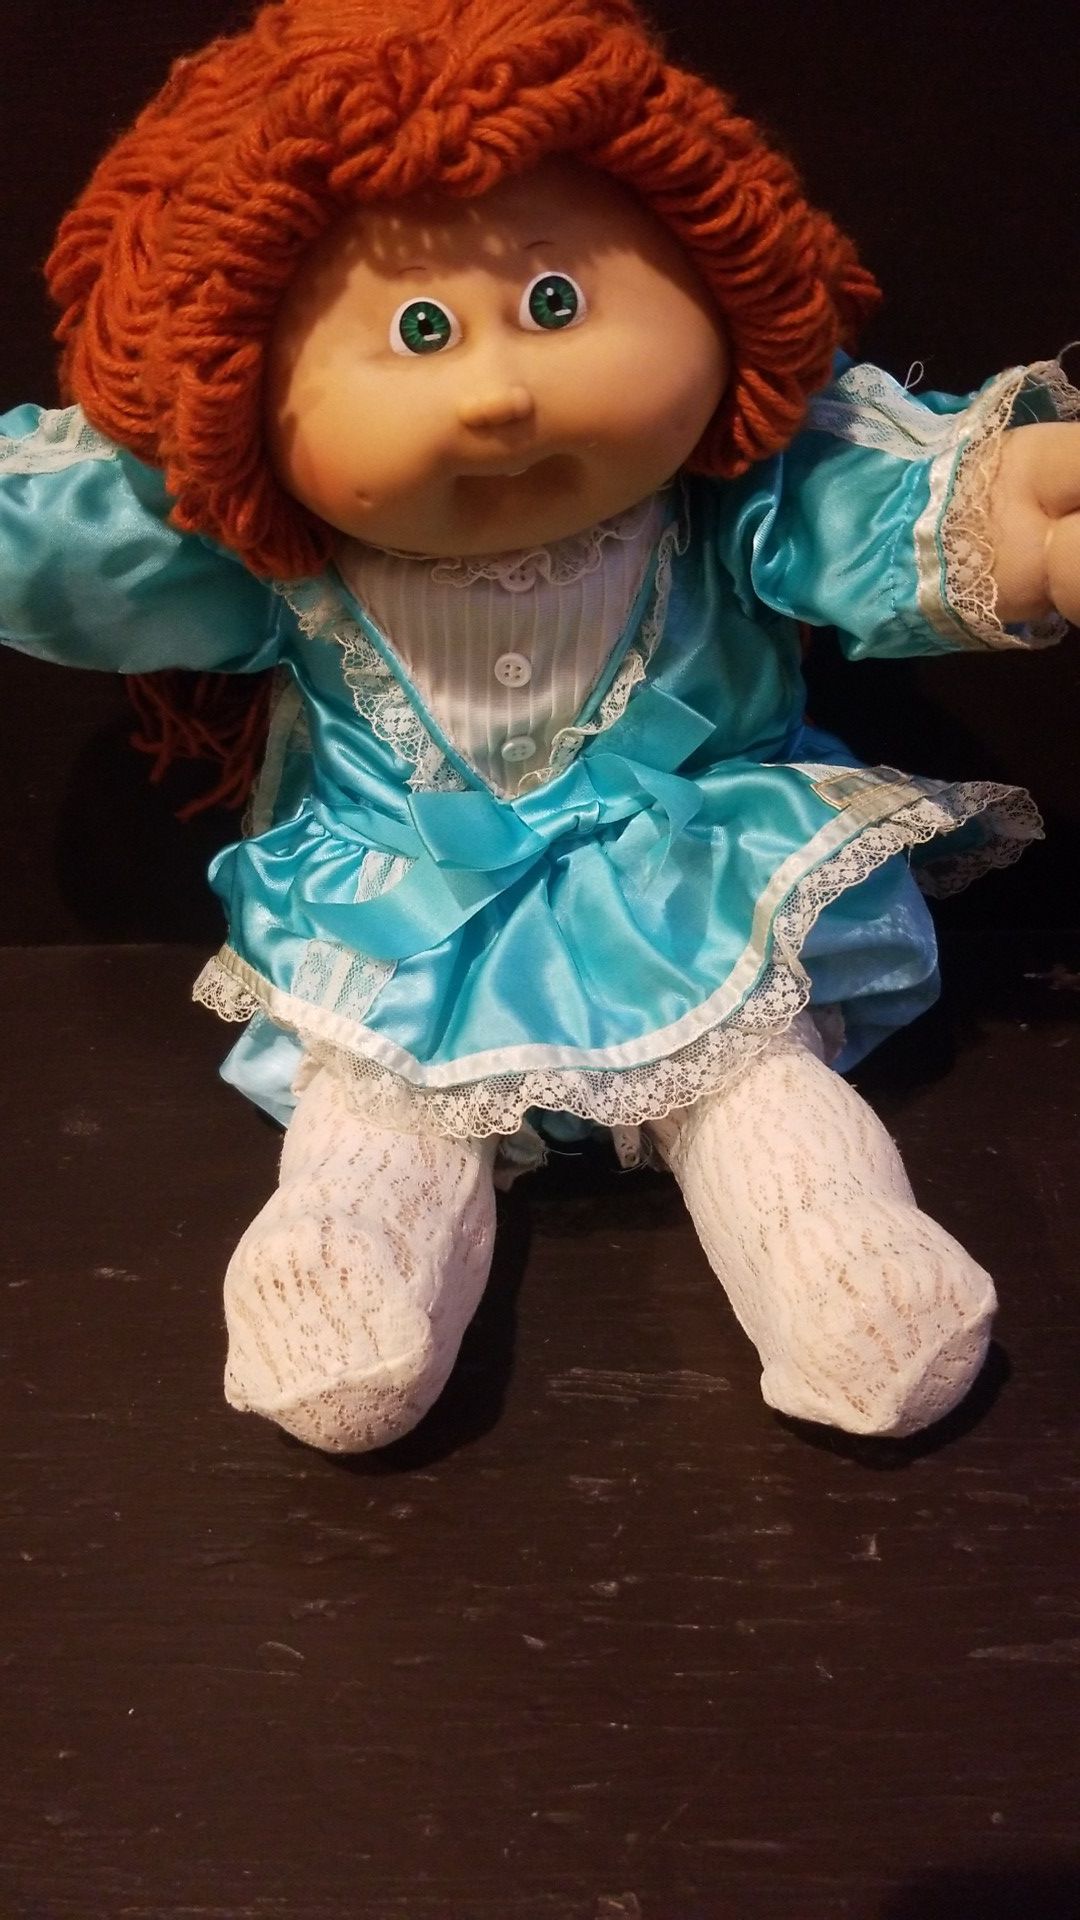 1978 - 1982 Cabbage patch doll